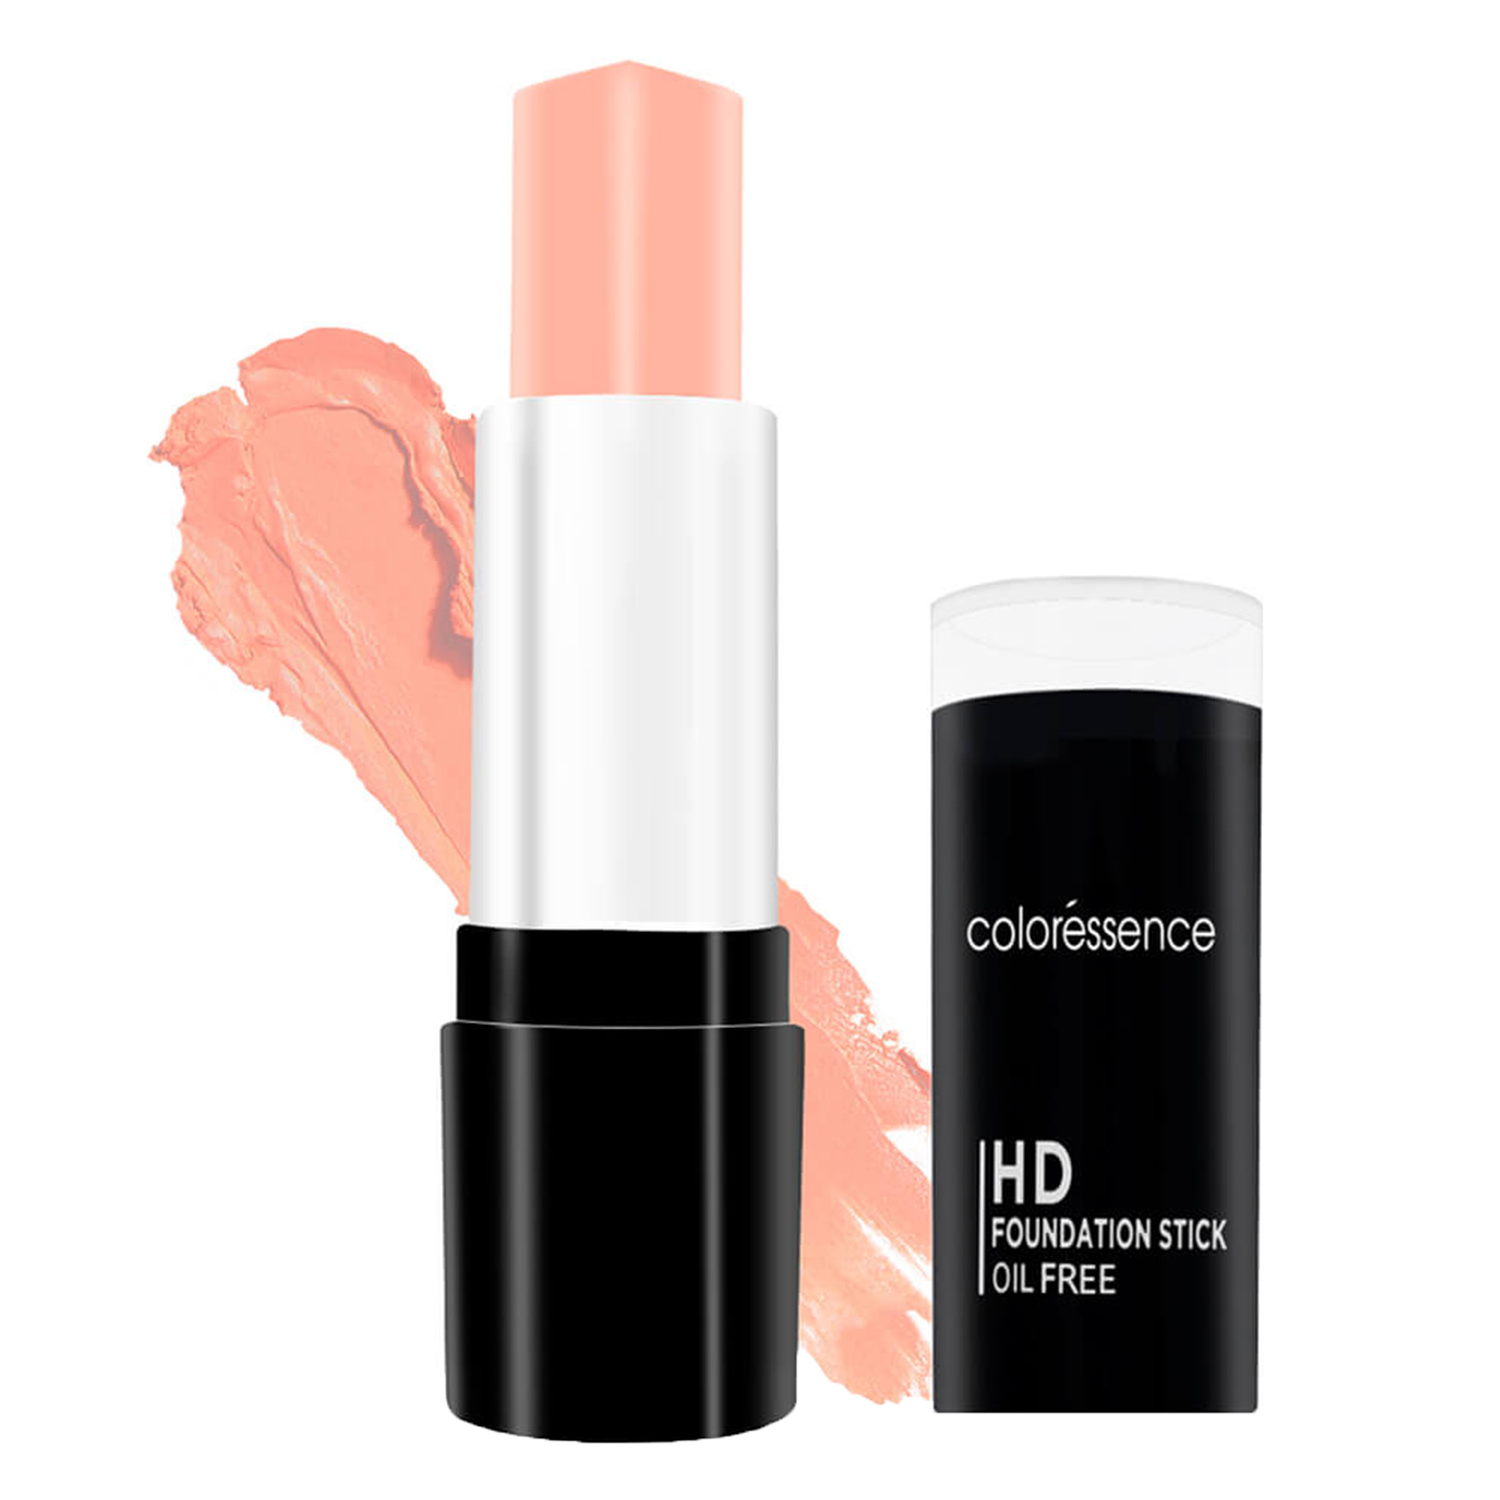 Coloressence Hd Foundation Stick Full Coverage Waterproof Rollon Makeup Panstick, 14gm-01 Natural Brown